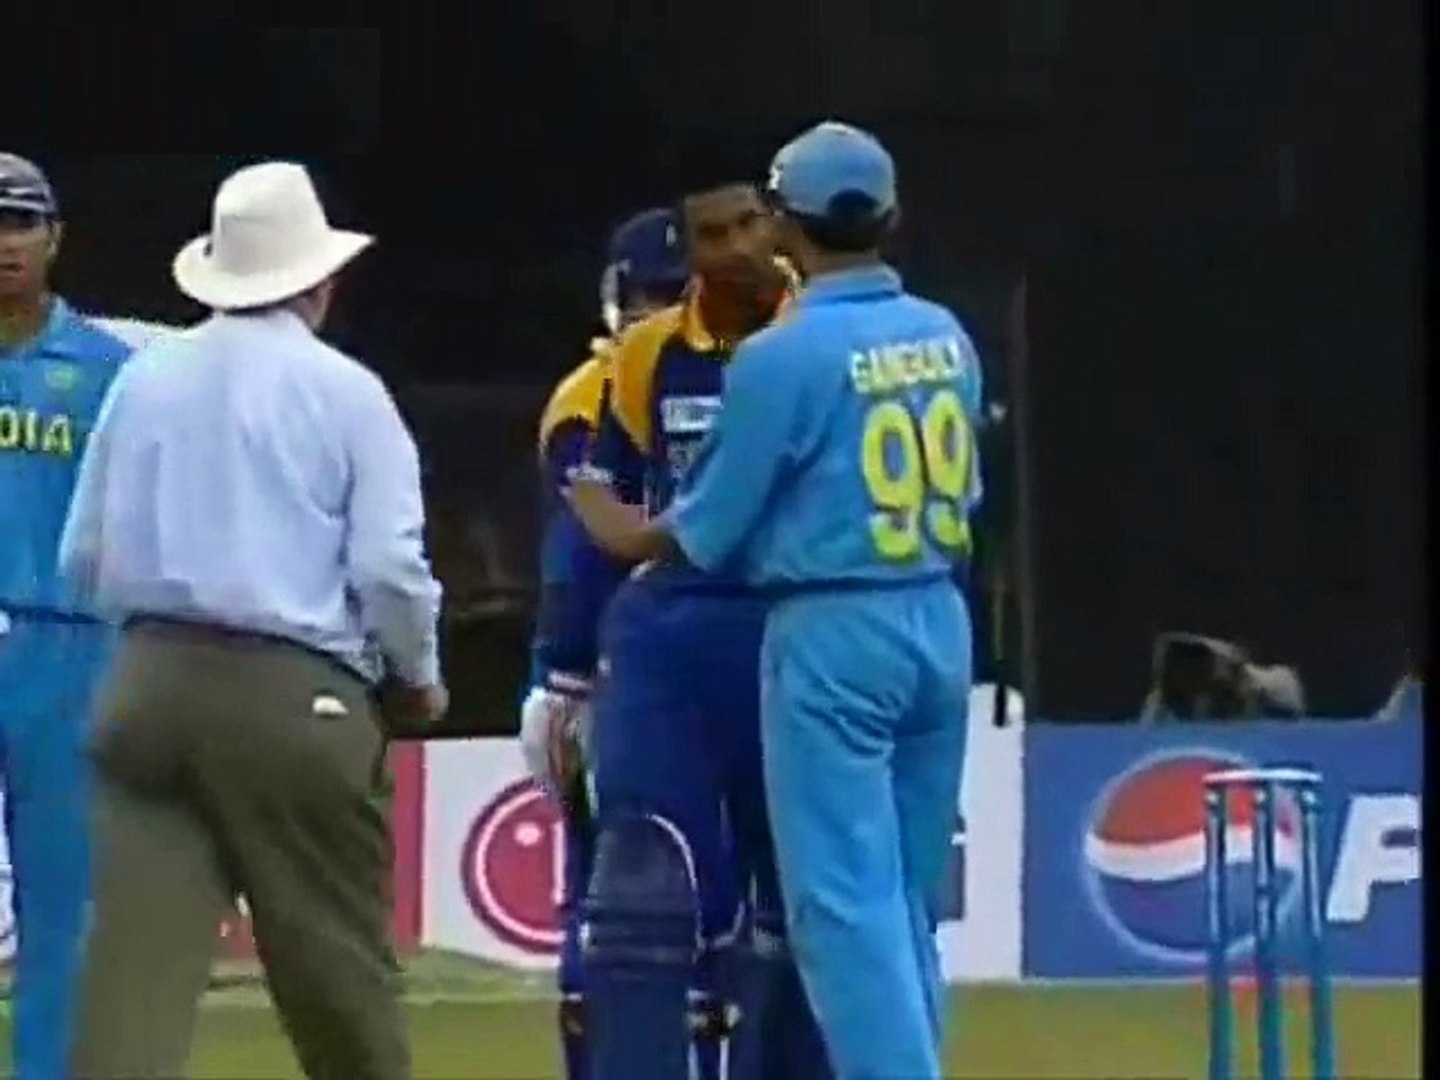 Ganguly arguing with Arnold over running on the pitch